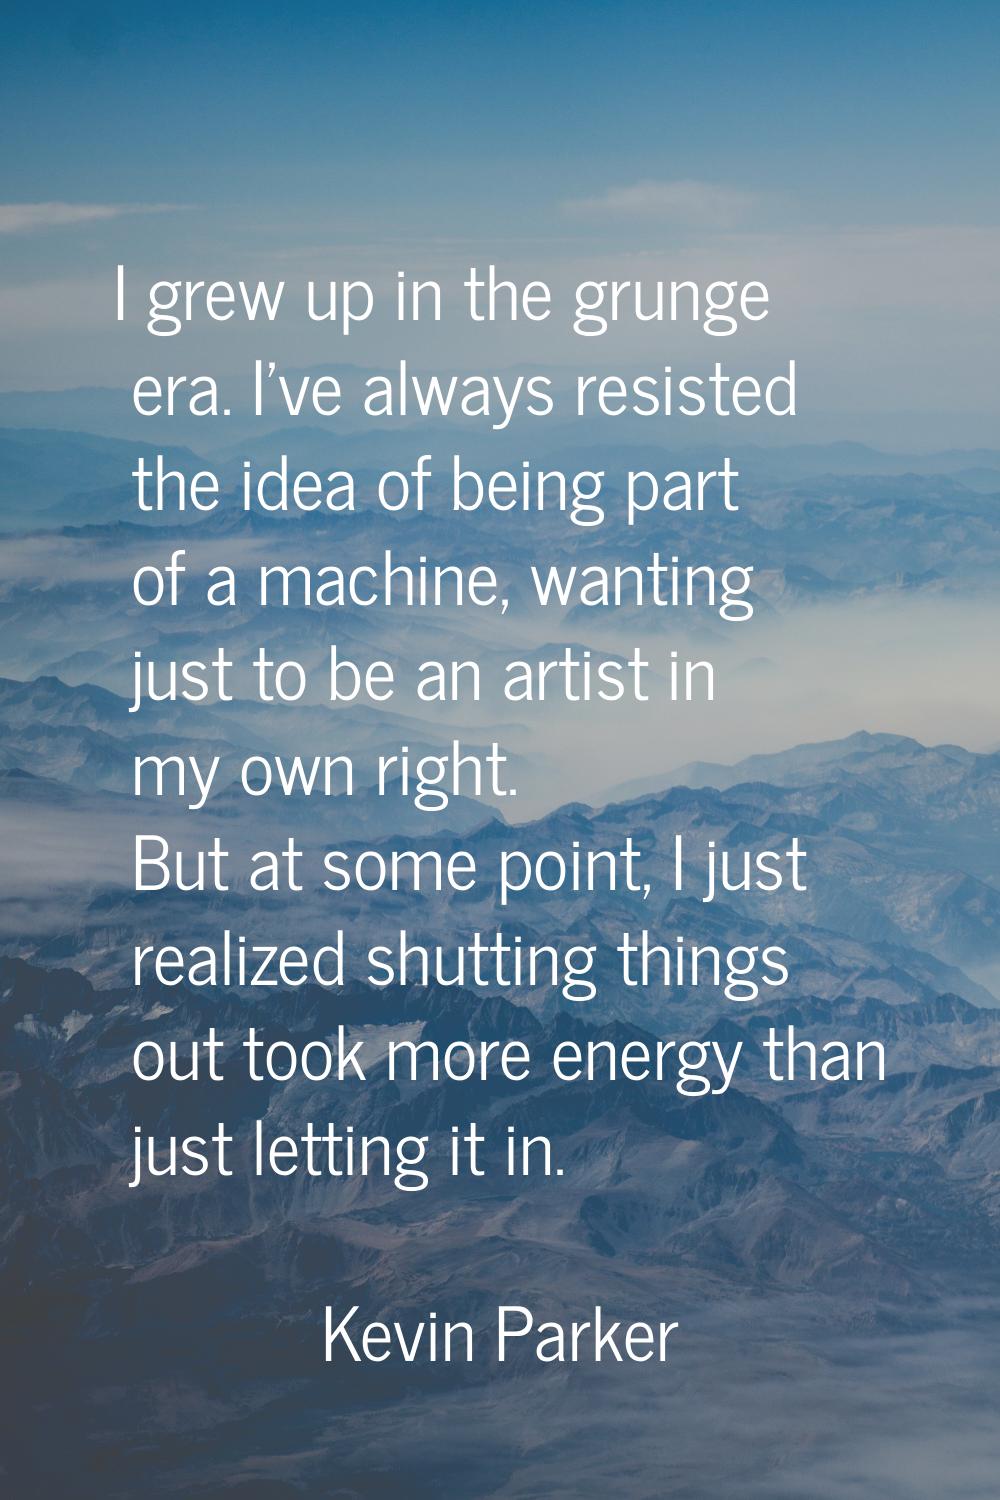 I grew up in the grunge era. I've always resisted the idea of being part of a machine, wanting just